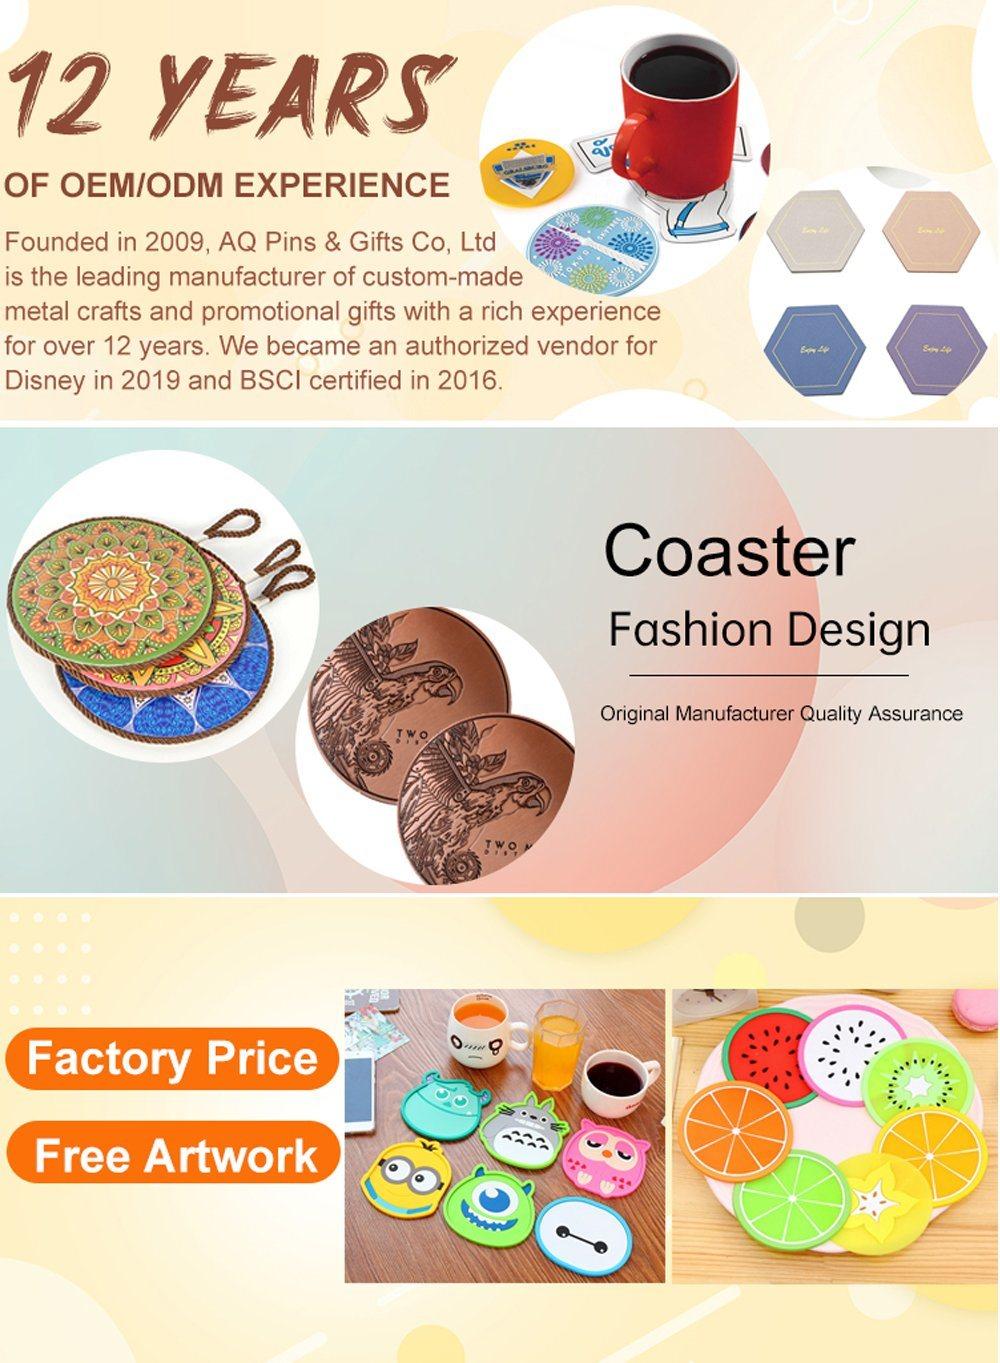 High Quality Plastic Promotional Soft Silicone Place Mats Elegant Dining Round Cork Placemats PVC Rubber Coaster